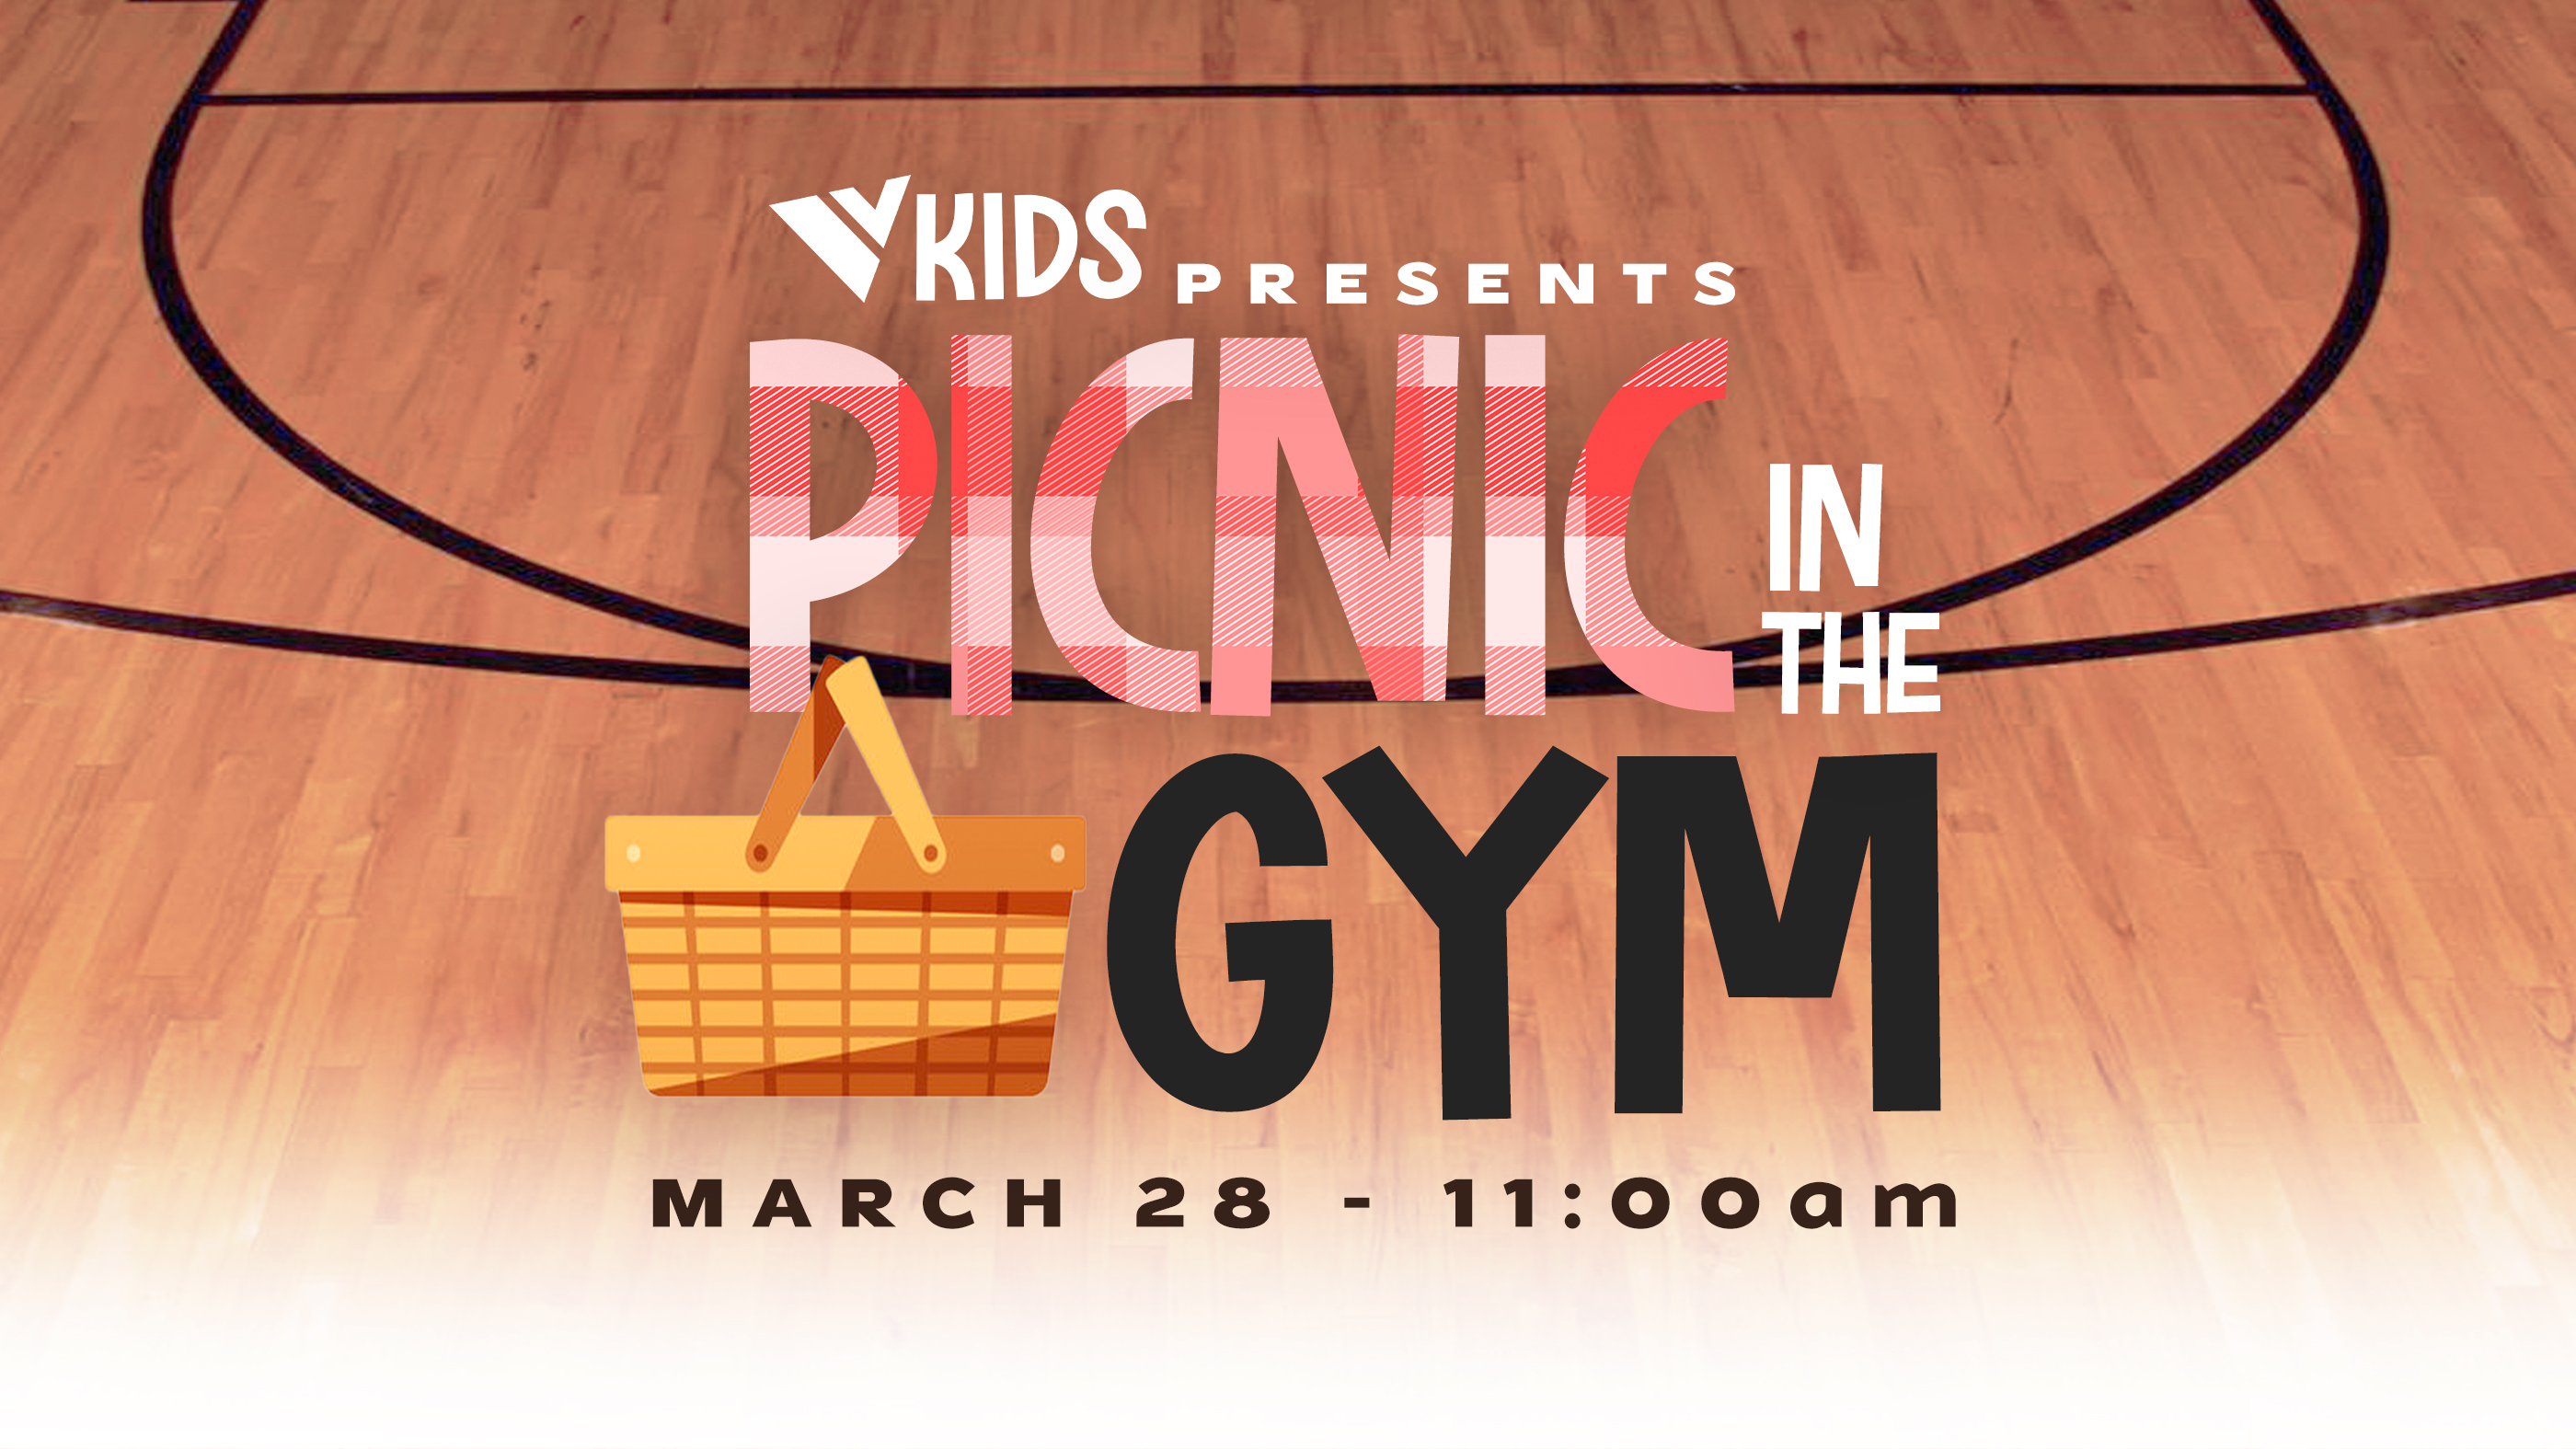 Picnic In the Gym - March 28